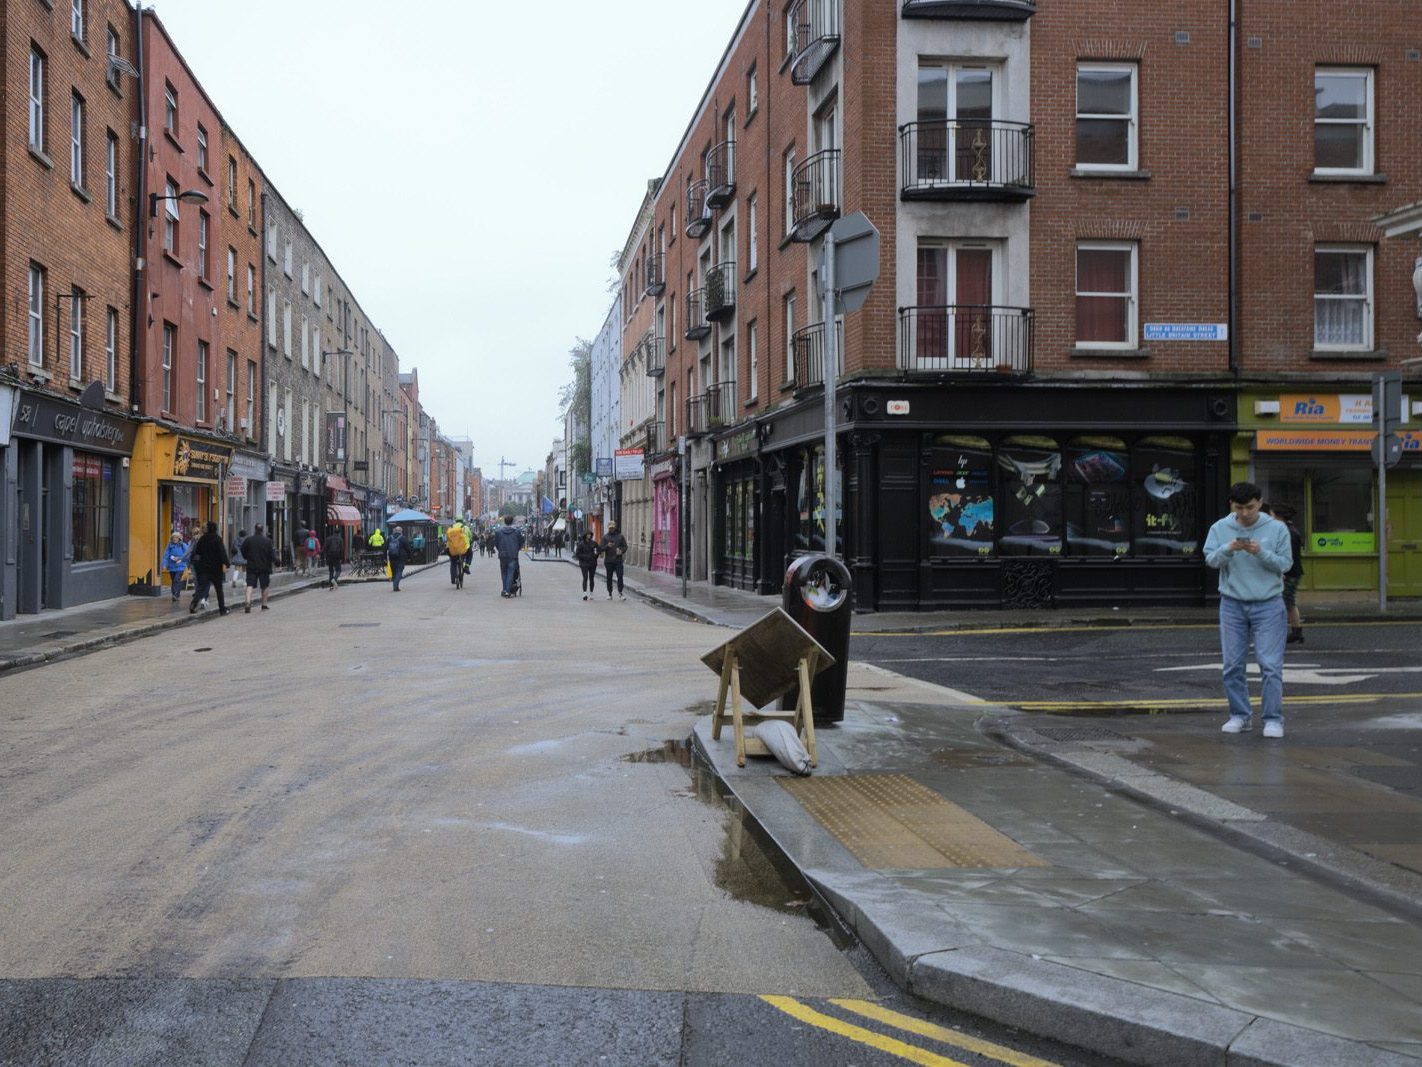 CAPEL STREET ON A DULL WET DAY [INTERIM CAPEL STREET IMPROVEMENT WORKS ARE NOW ONGOING] 012